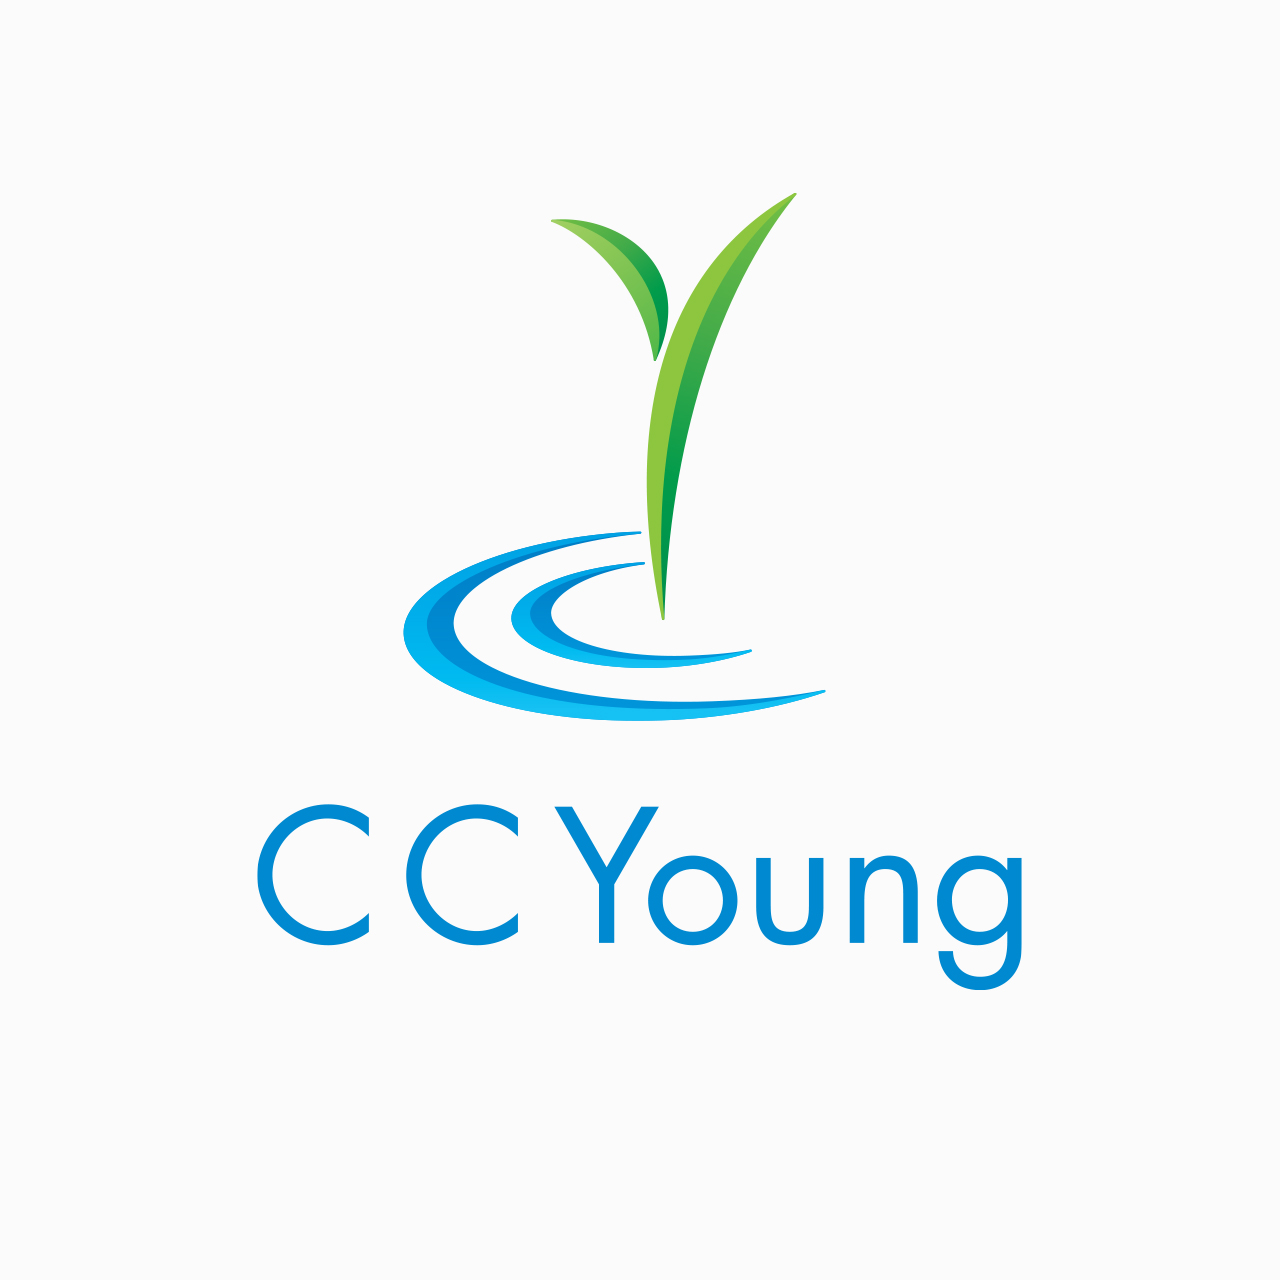 Logo design and type treatment for Los C. C. Young Senior Living Community